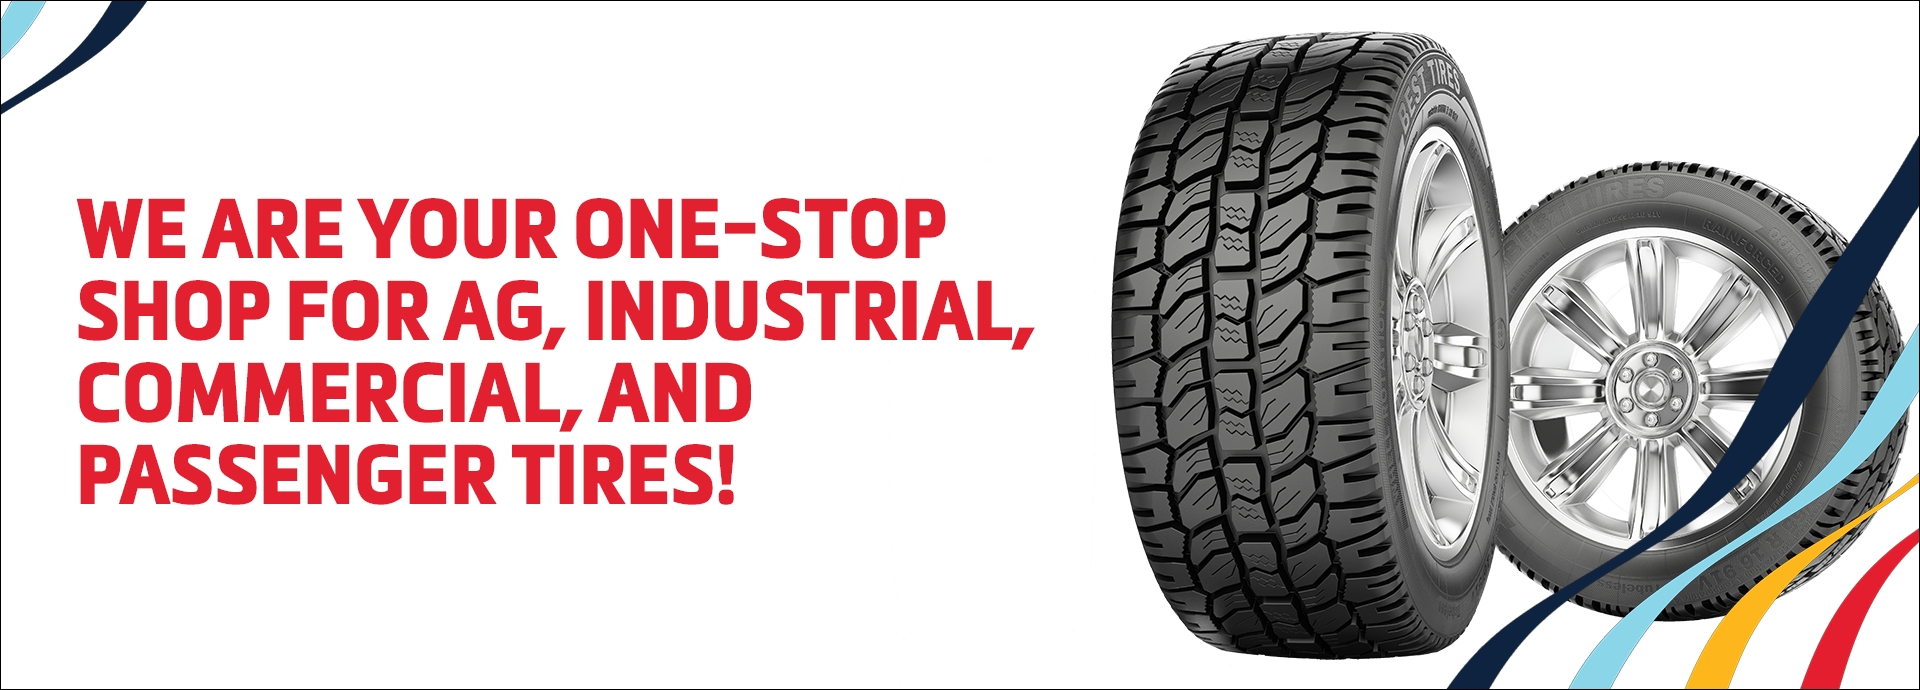 One-Stop Shop Tires